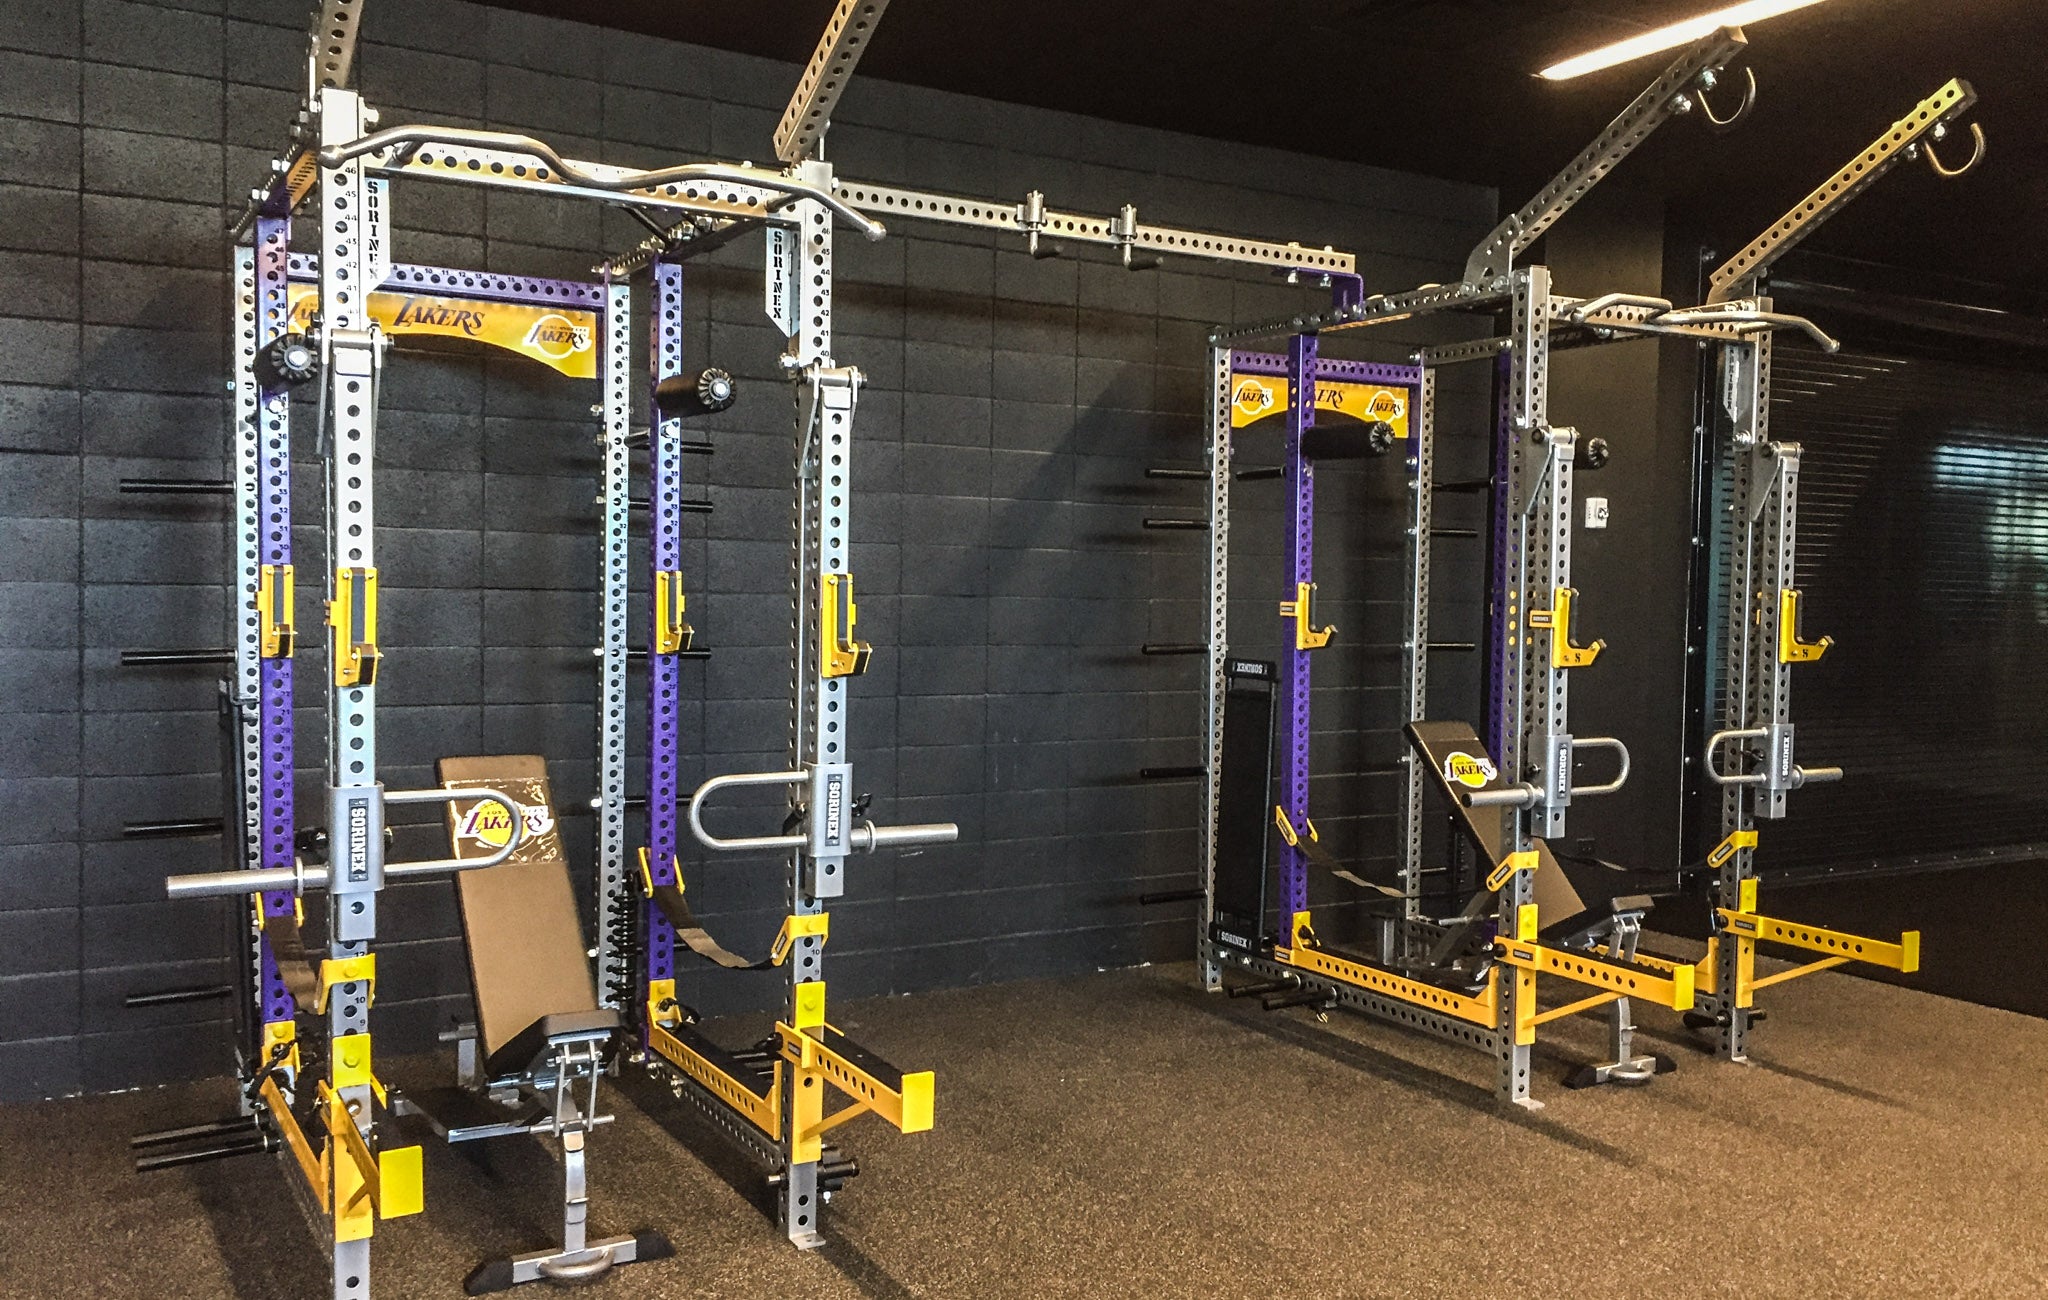 LA Lakers Weight Room